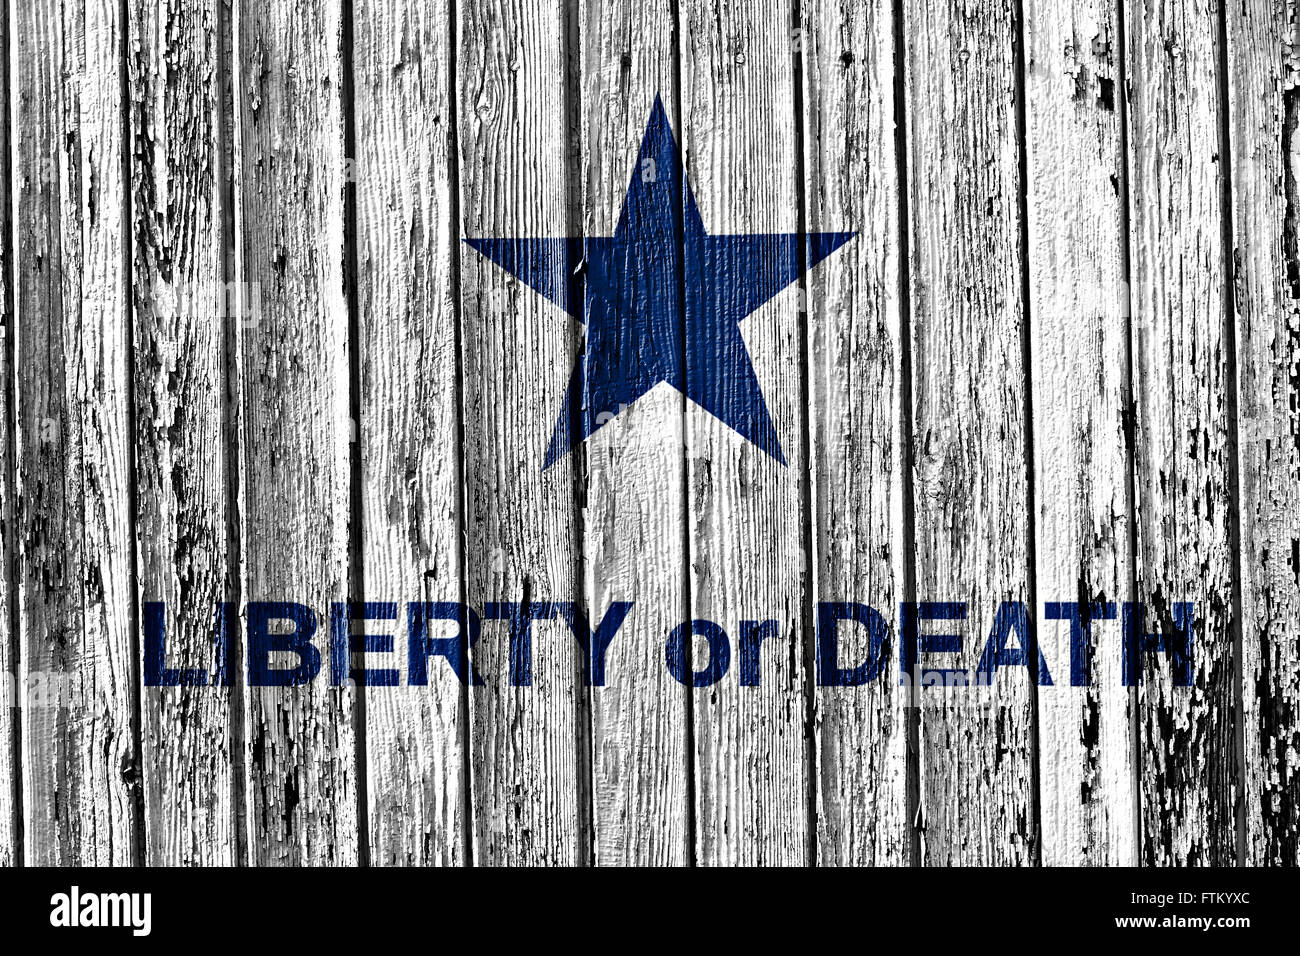 slogan Liberty or Death painted on wooden frame Stock Photo